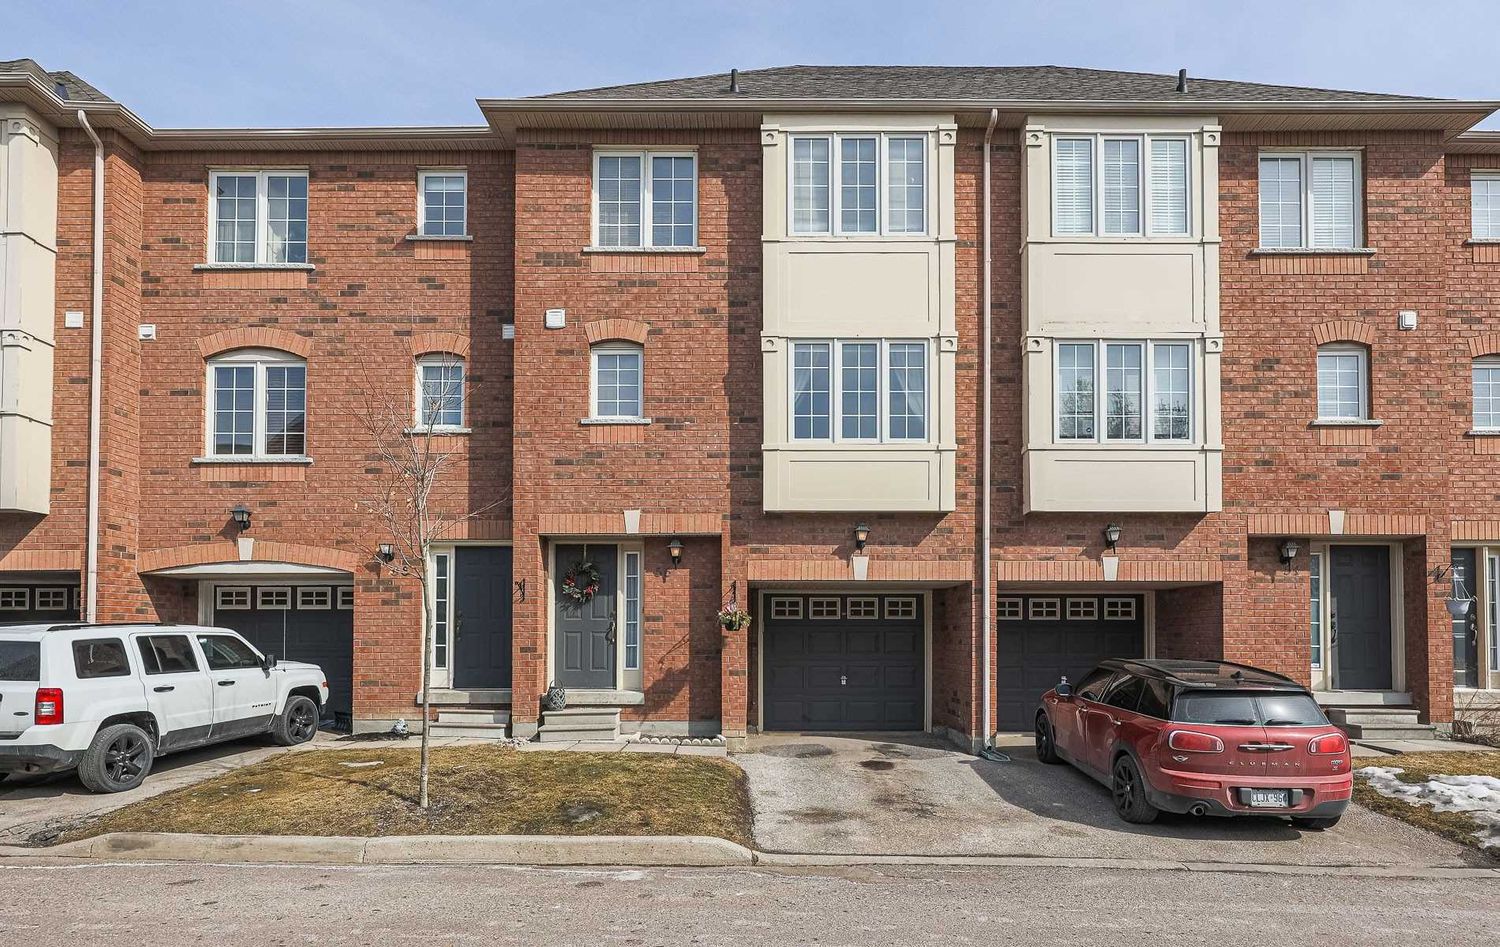 24-101 Sandlewood Court. Sandlewood Court Townhomes is located in  Aurora, Toronto - image #1 of 3